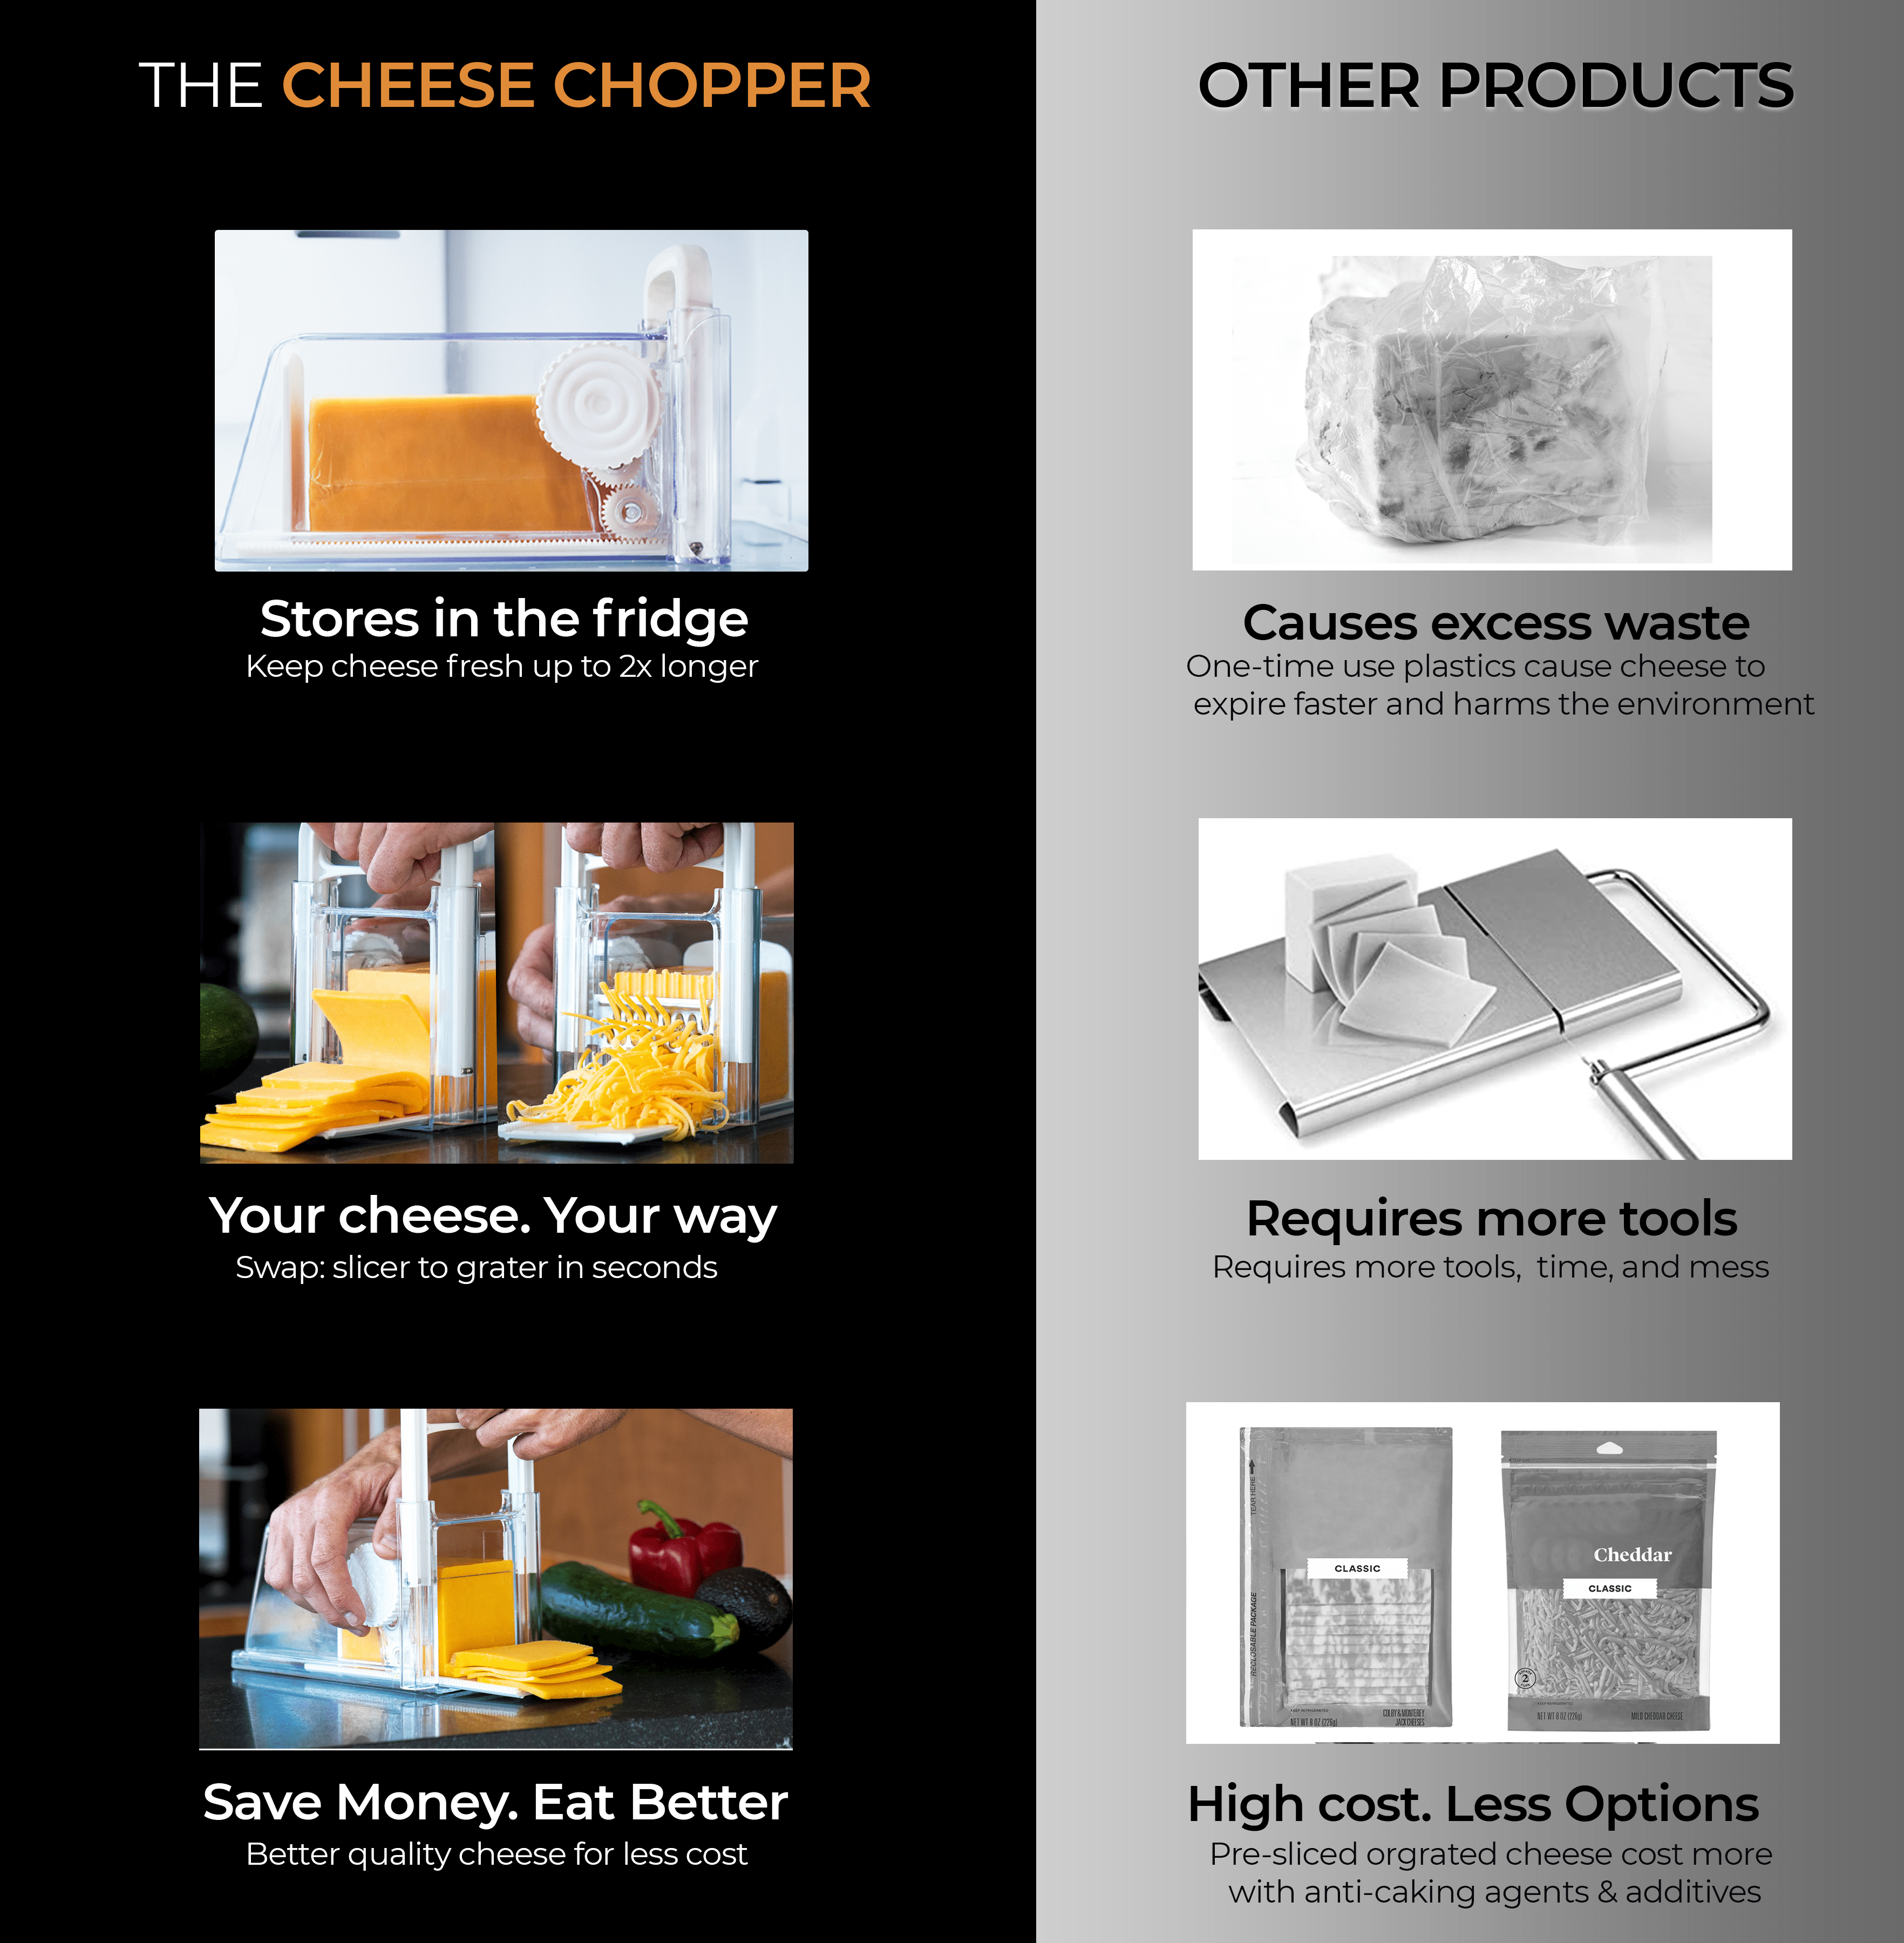 Cheese Chopper 4-in-1 | Cheese Storage with Handle, Grater, Wire and Blade  Attachments | Instant Fridge Storage | up to 2lb Blocks